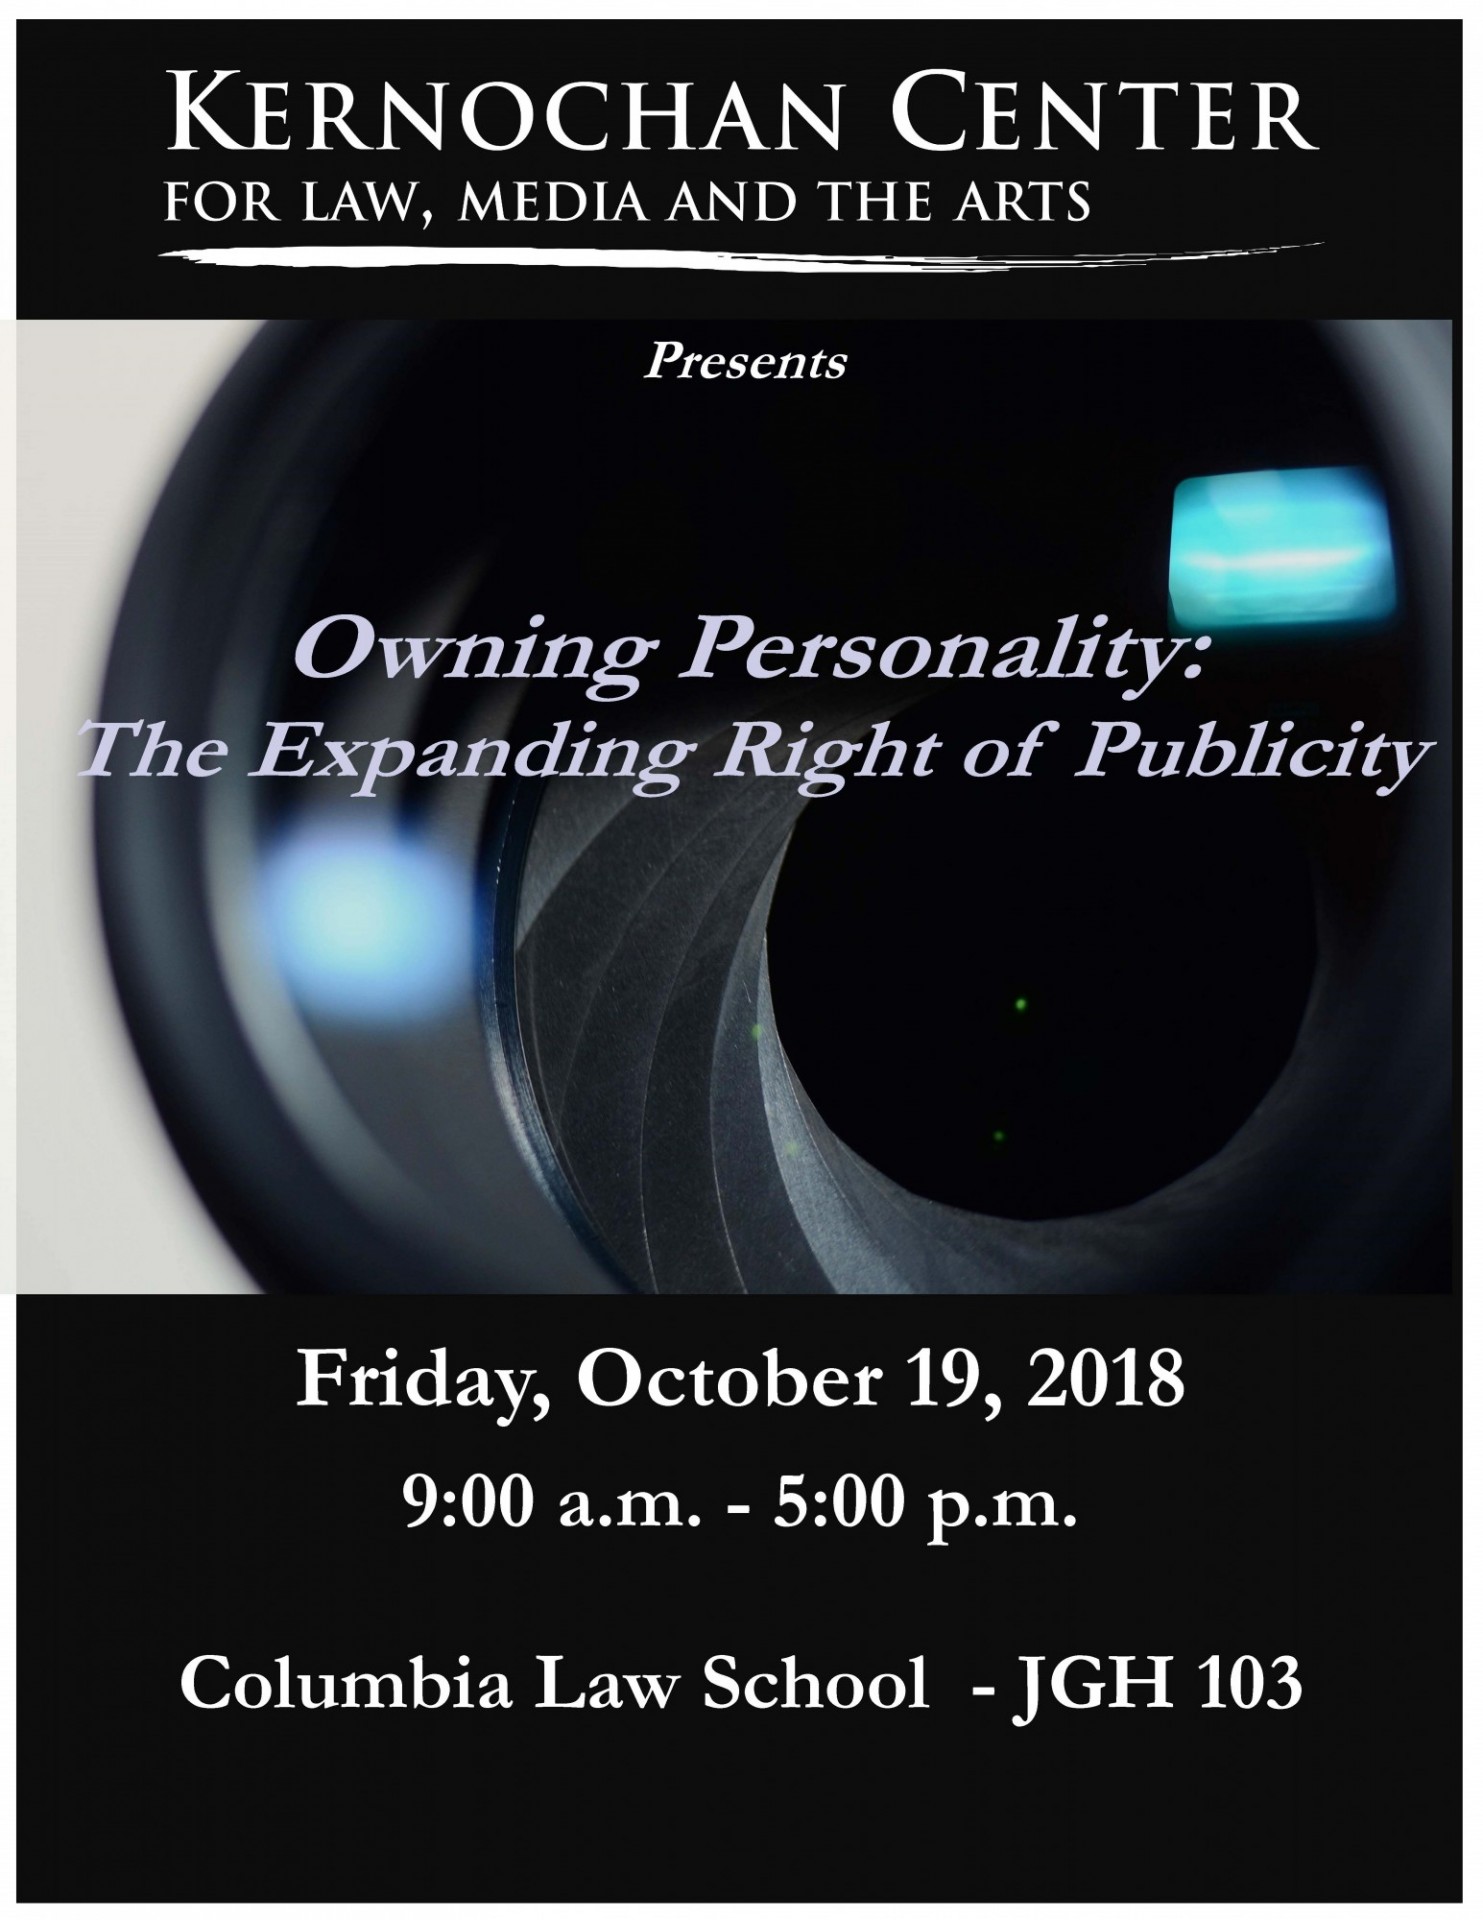 2018 - Owning Personality: The Expanding Right of Publicity